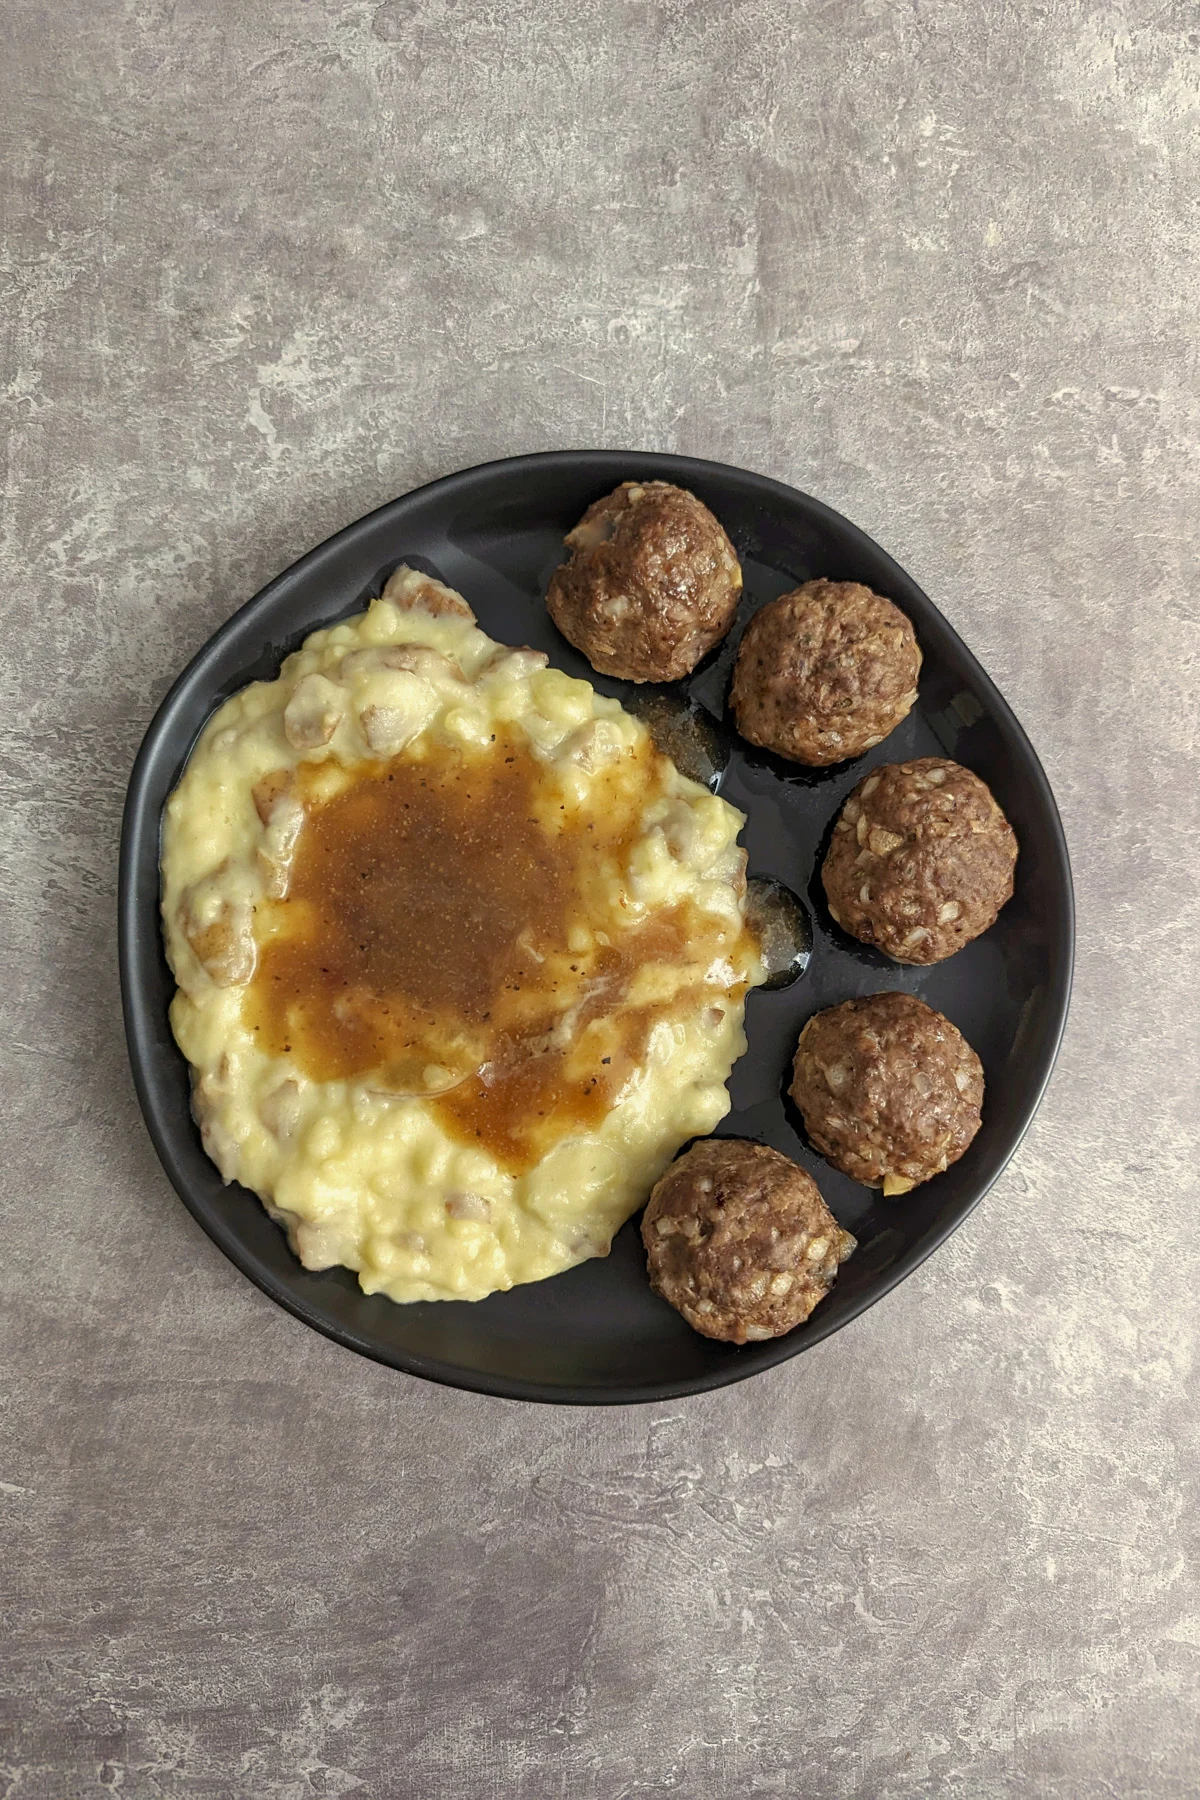 Elk meatballs with mashed potatoes and gravy.